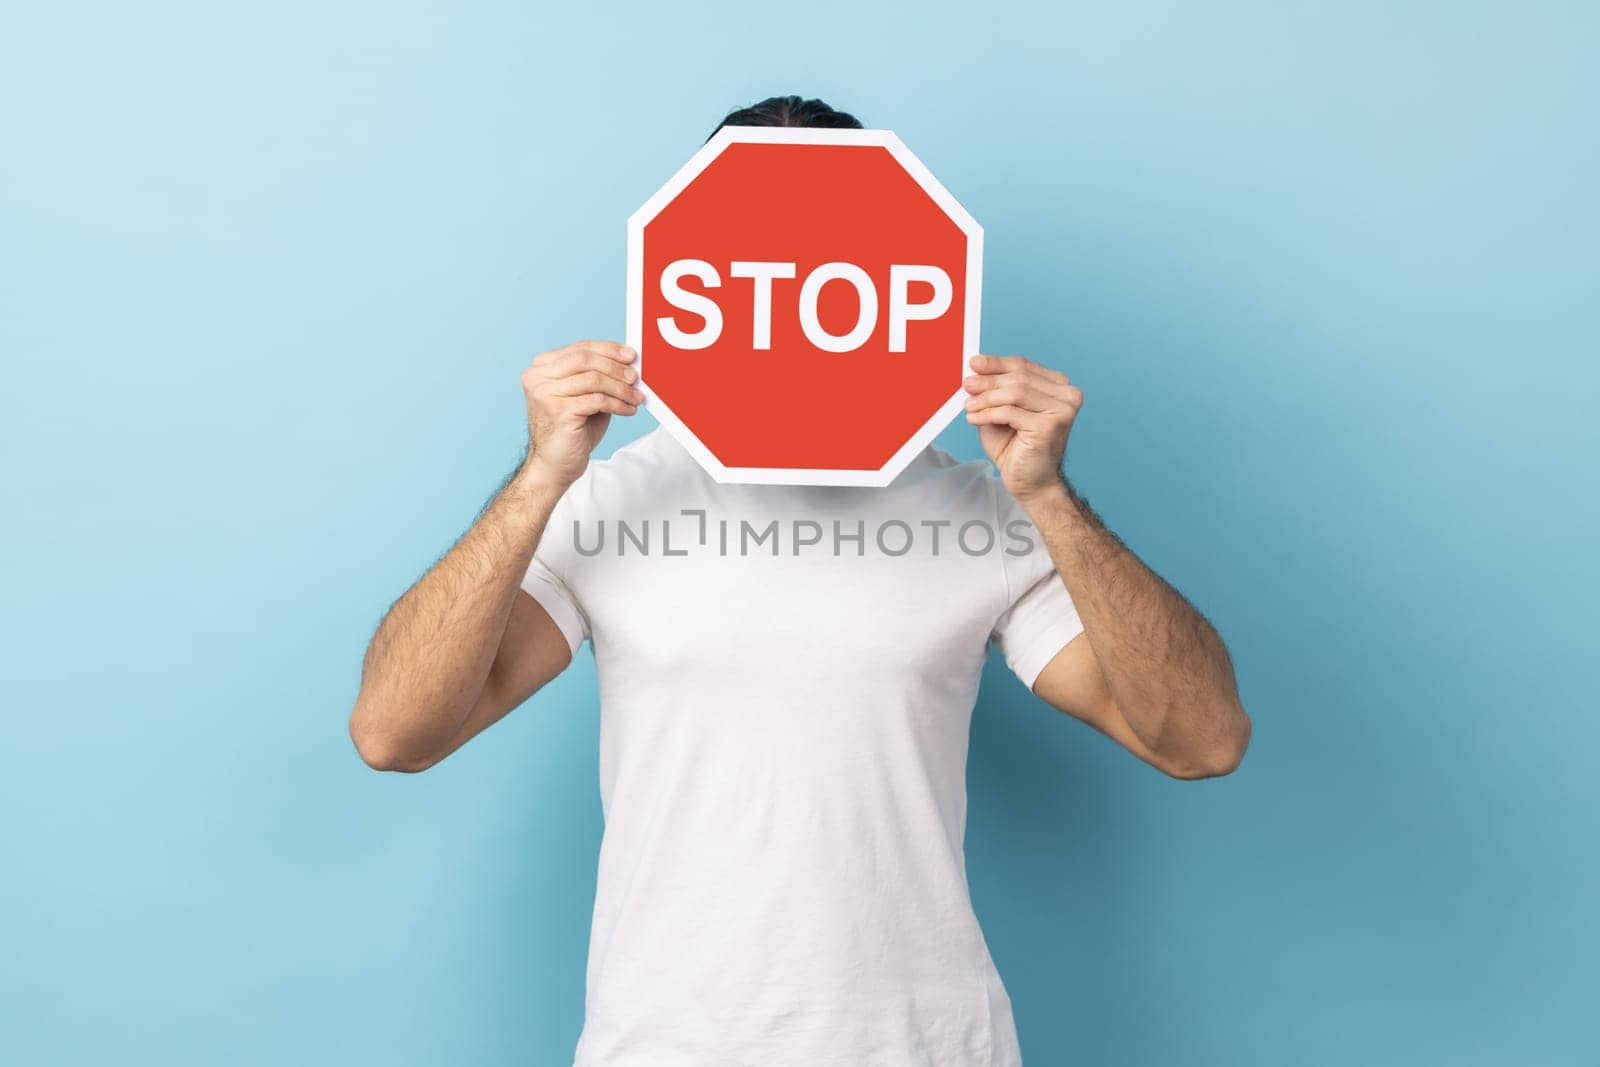 Portrait of unknown man wearing white T-shirt covering face with Stop symbol, anonymous person holding red traffic sign, warning about road safety rules. Indoor studio shot isolated on blue background